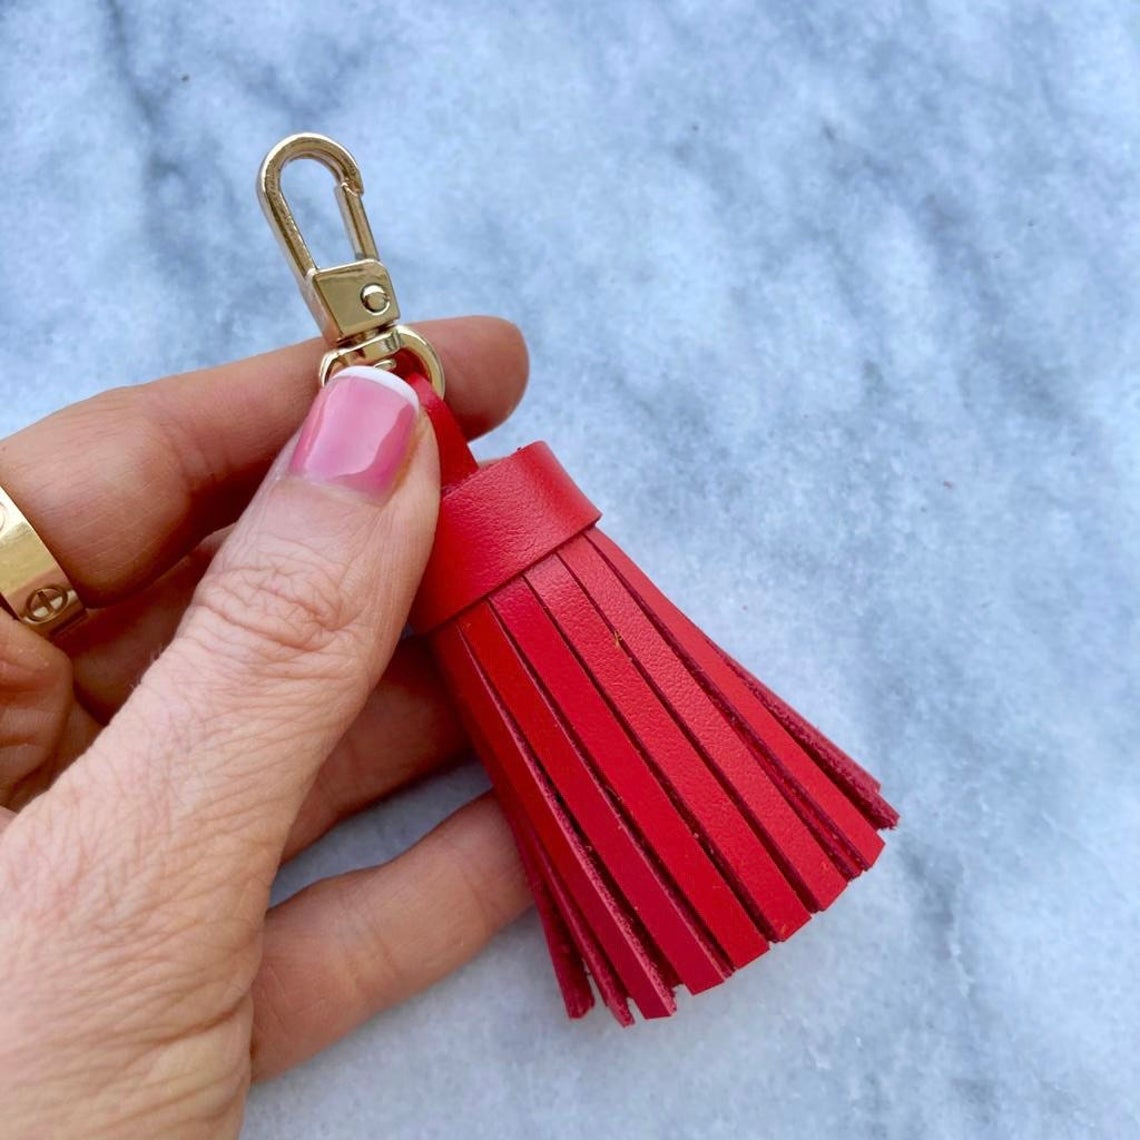 Genuine Leather Tassel Keychain Handbag Charm Handmade from Top quality Real Leather - Bag Charm Accessory - Leather Tassel for Bag - Colors